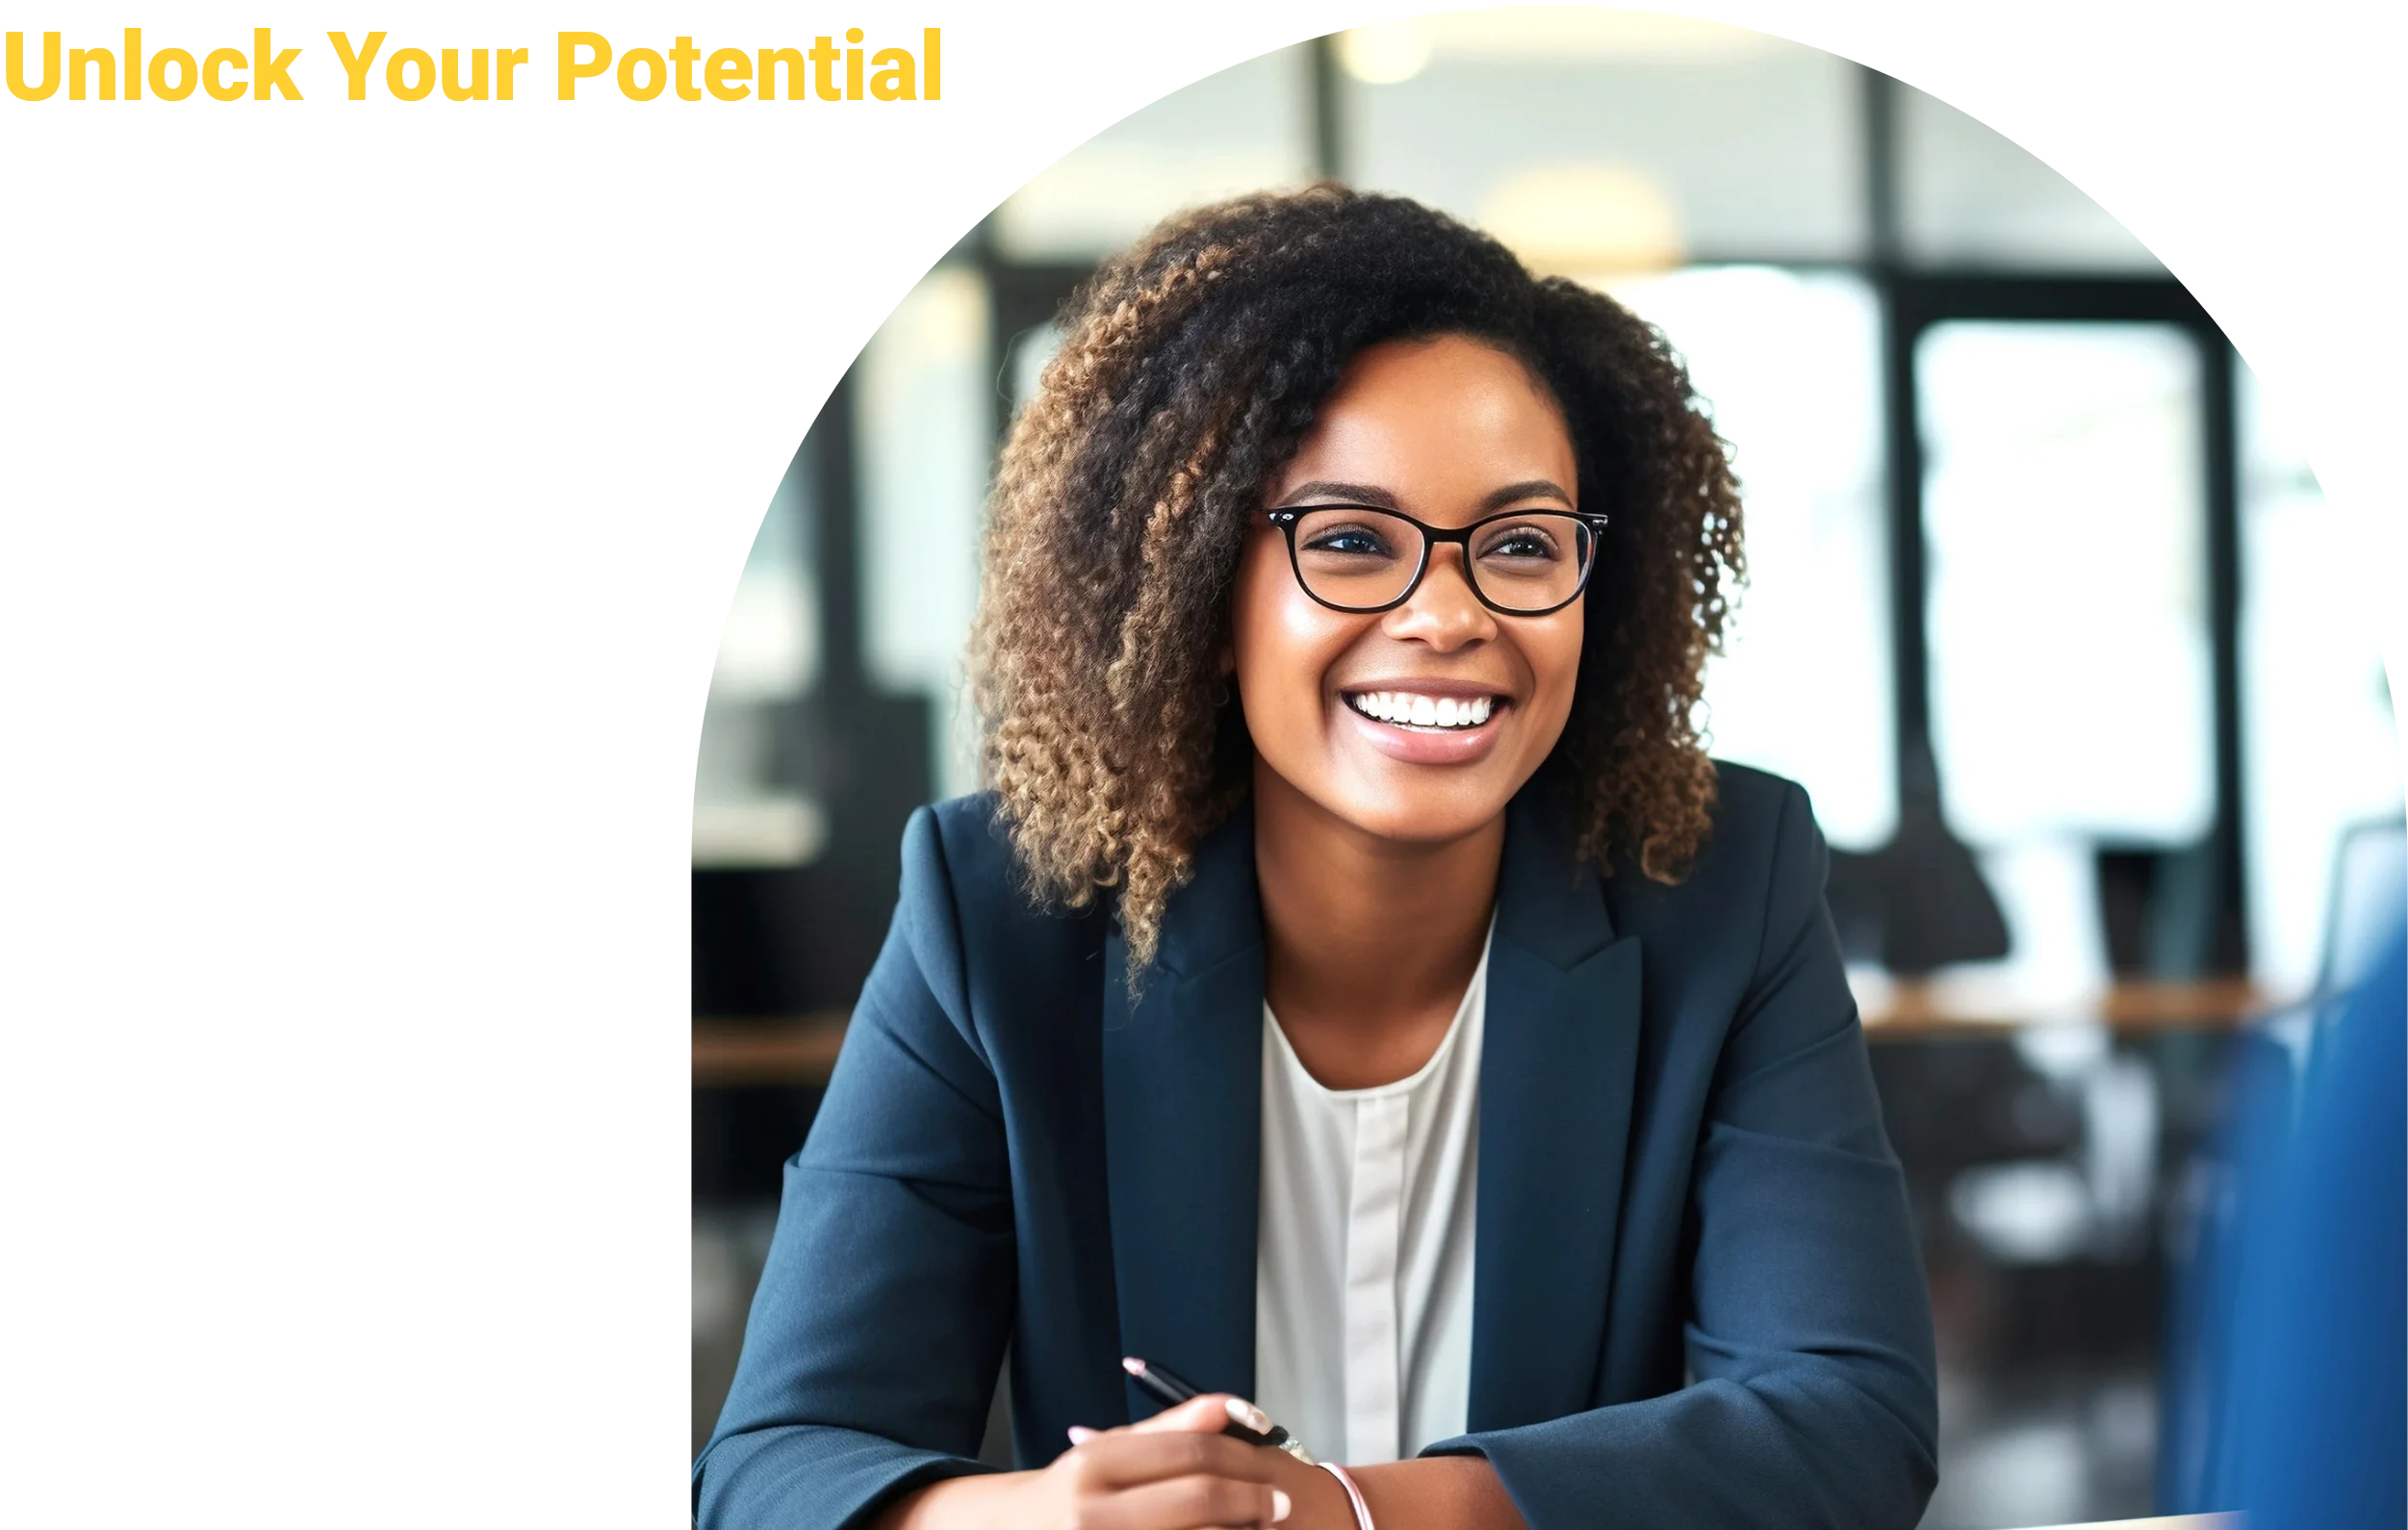 Law Professional Smiling Unlock Your Potential